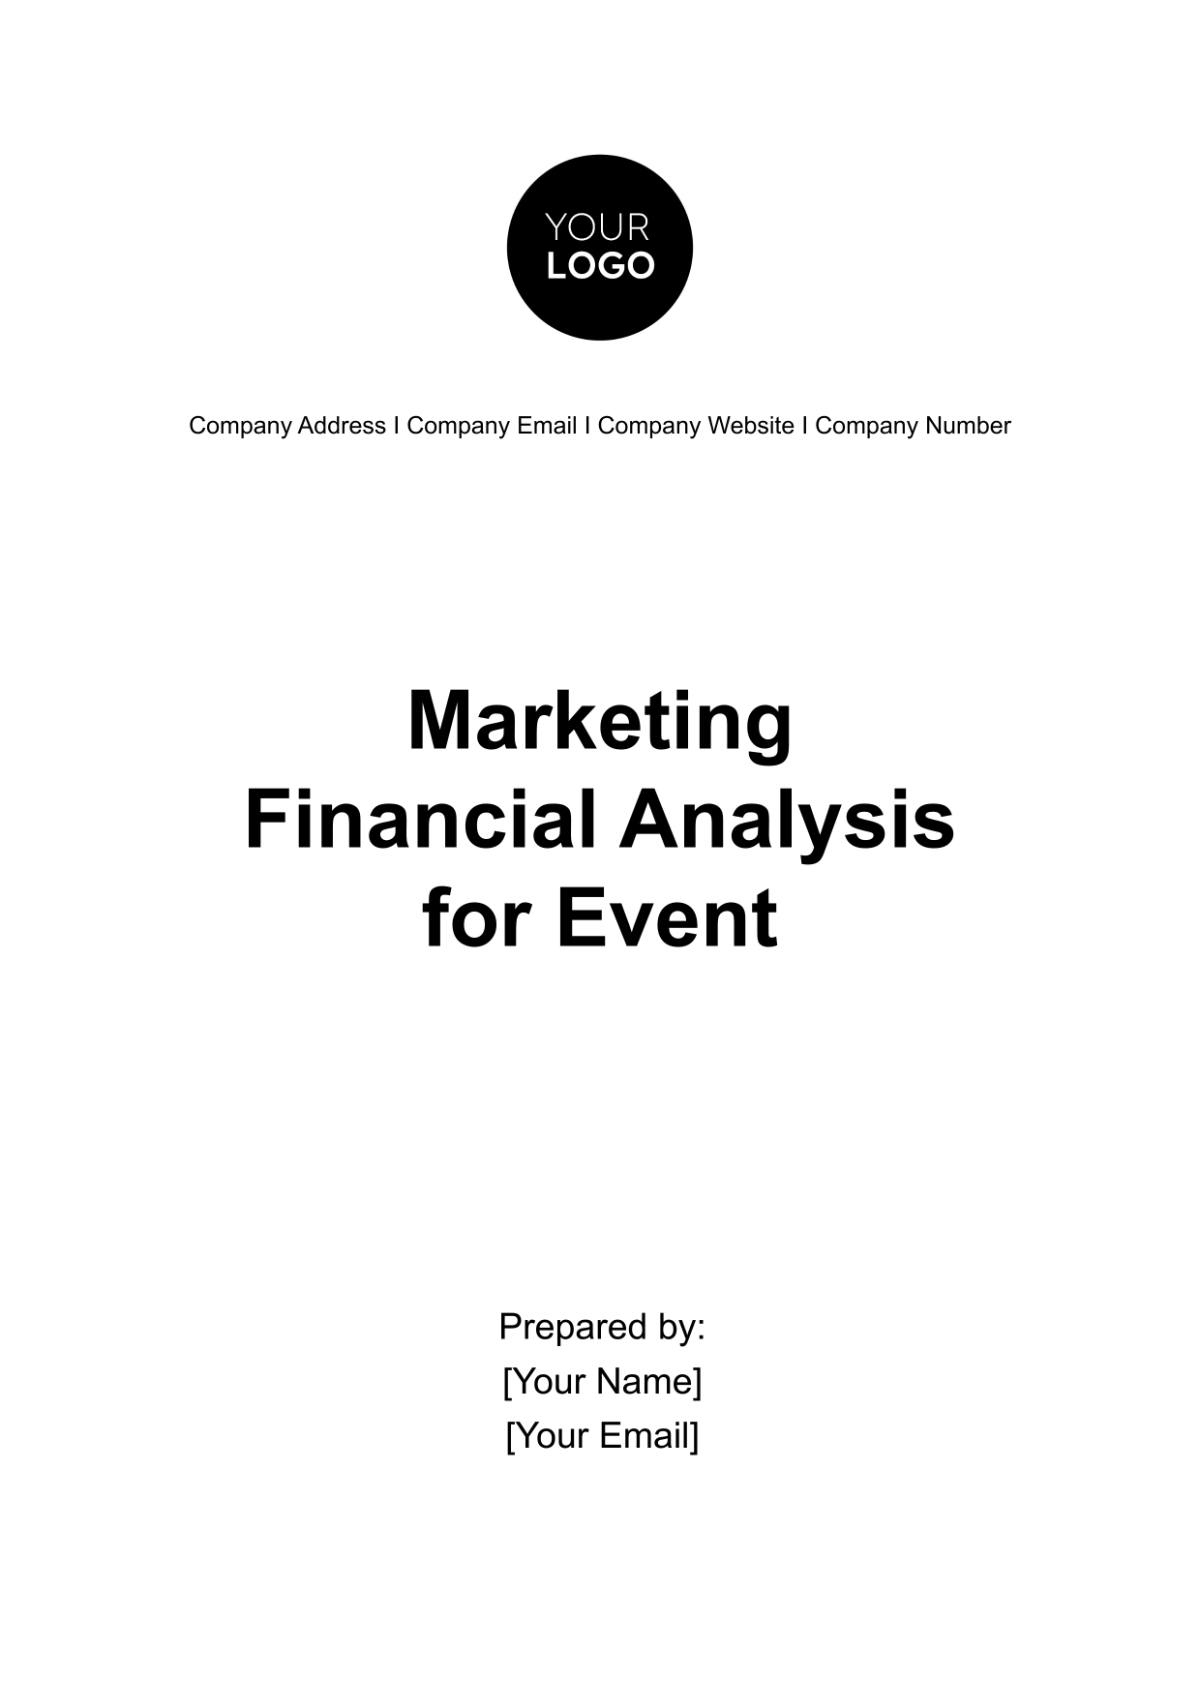 Free Marketing Financial Analysis for Event Template